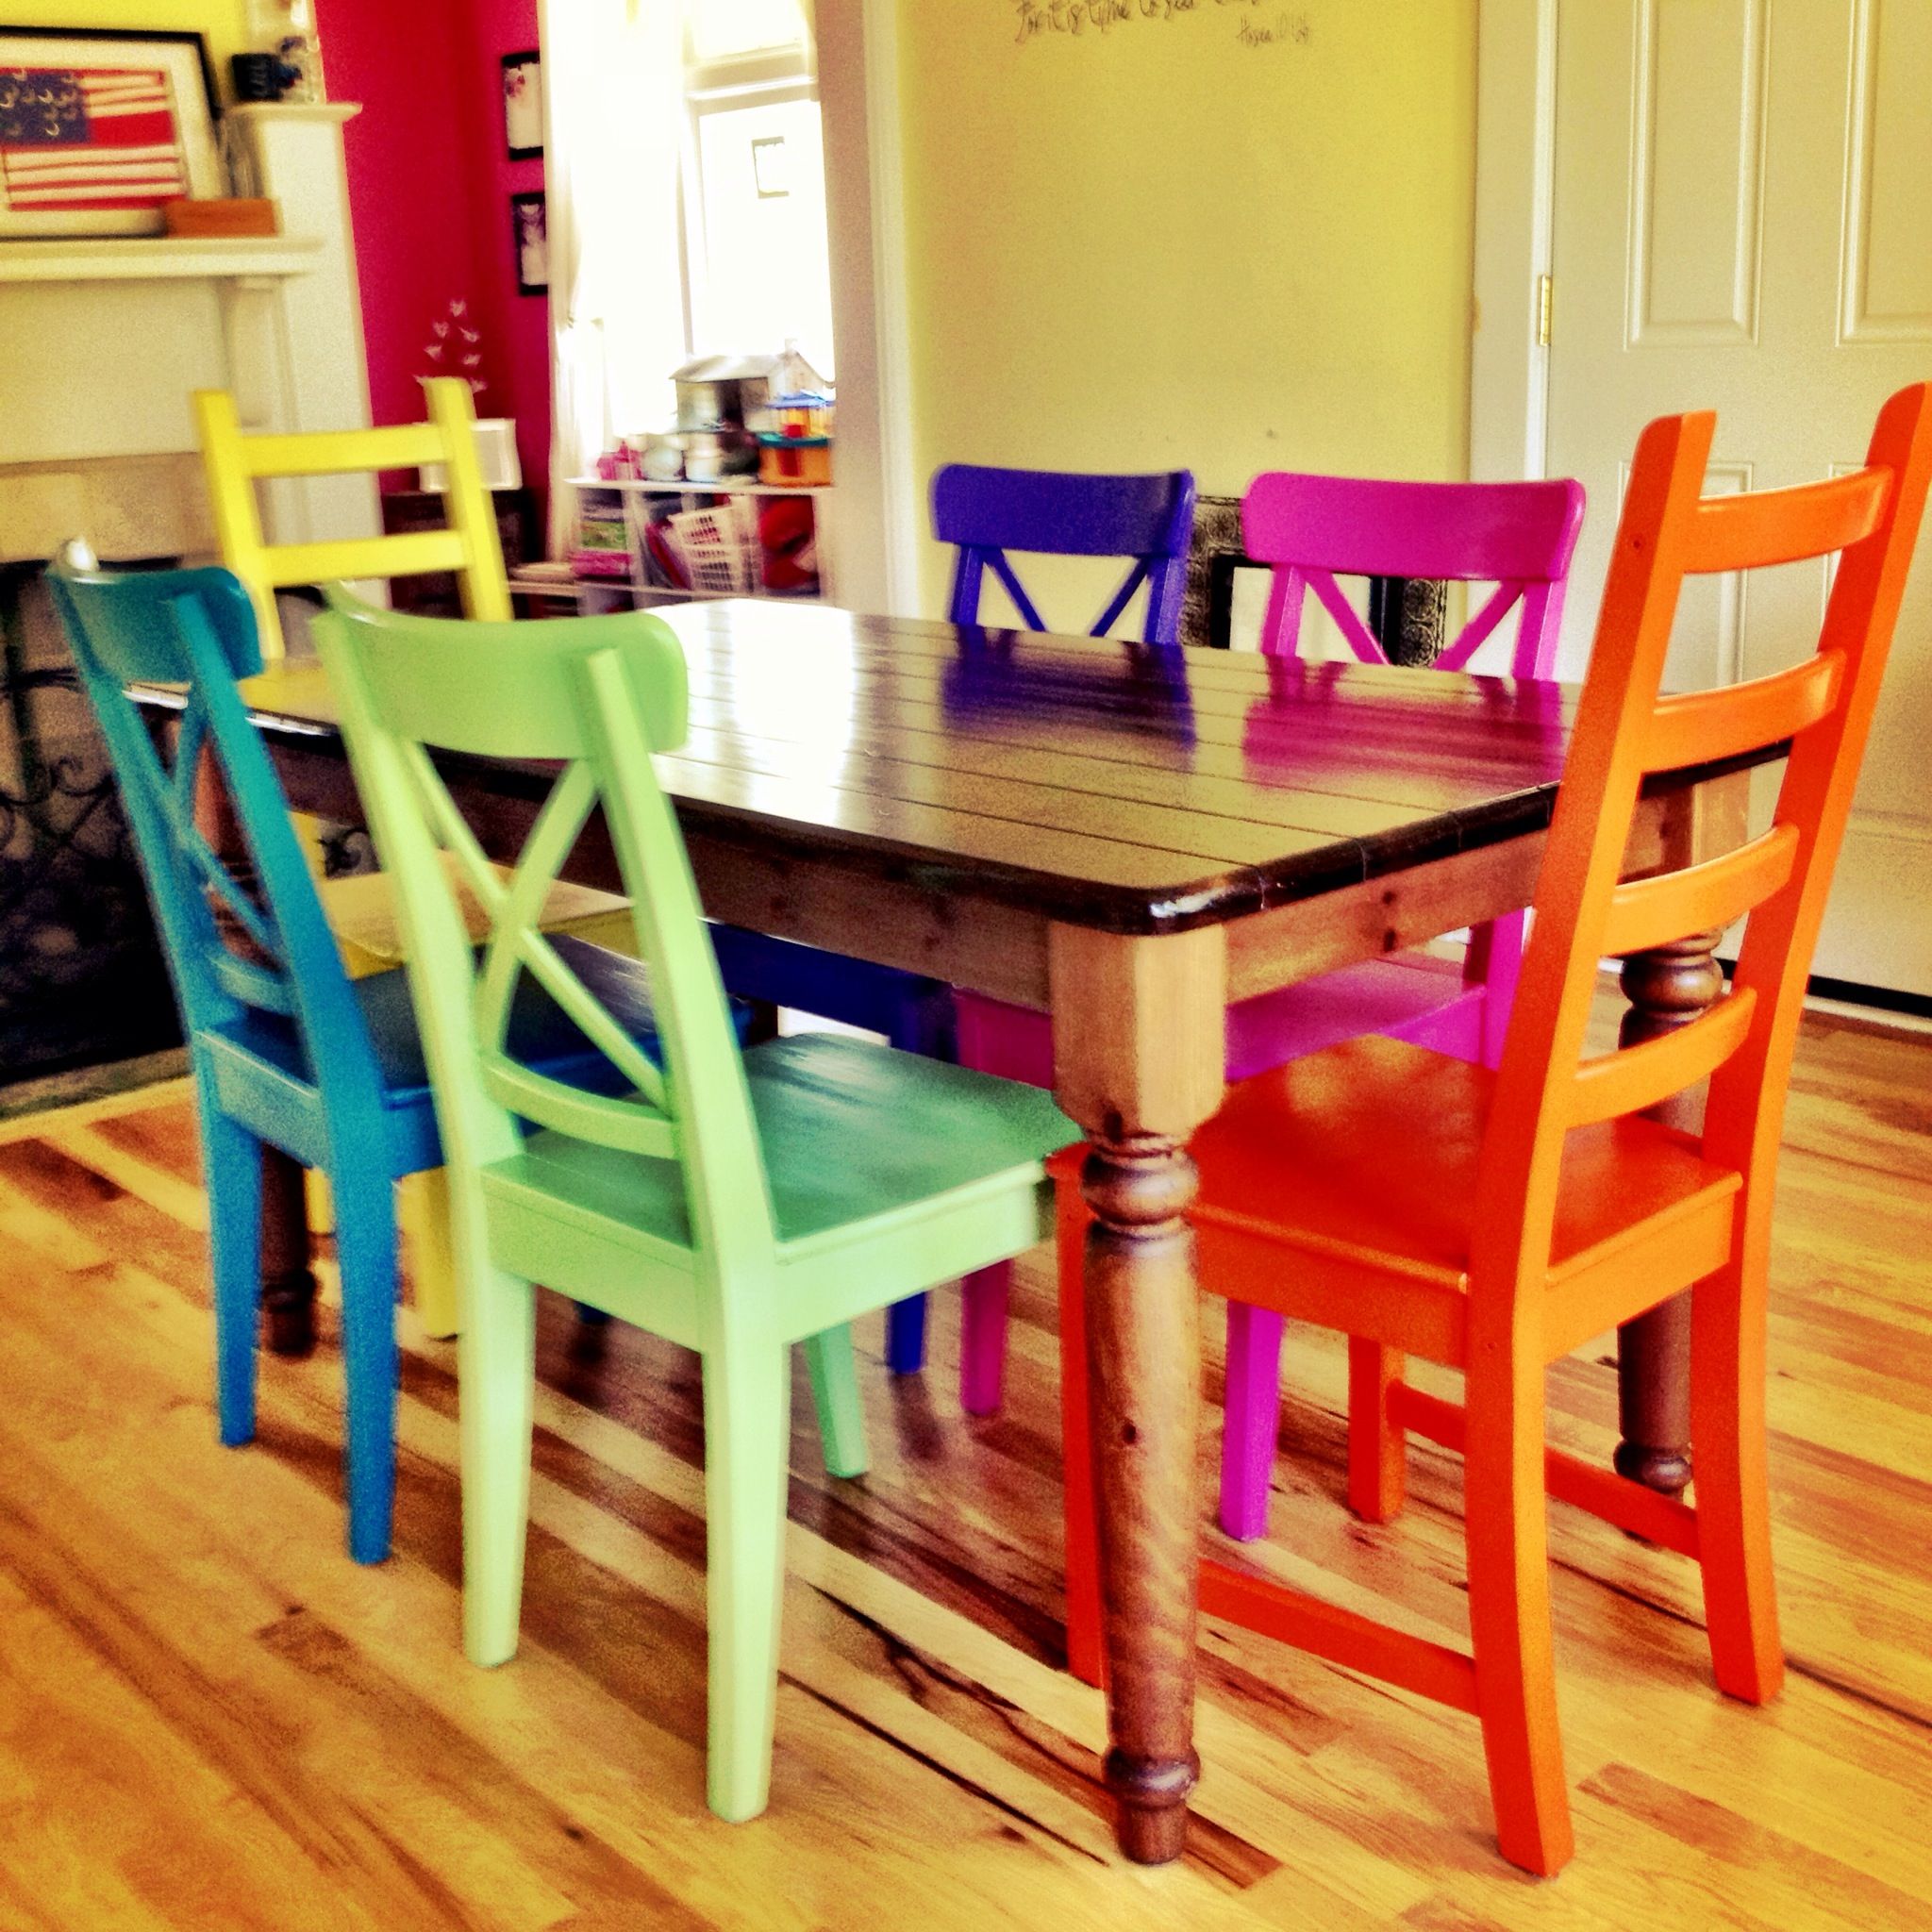 Rustoleum spray-painted chairs - these remind me of all the colored ...